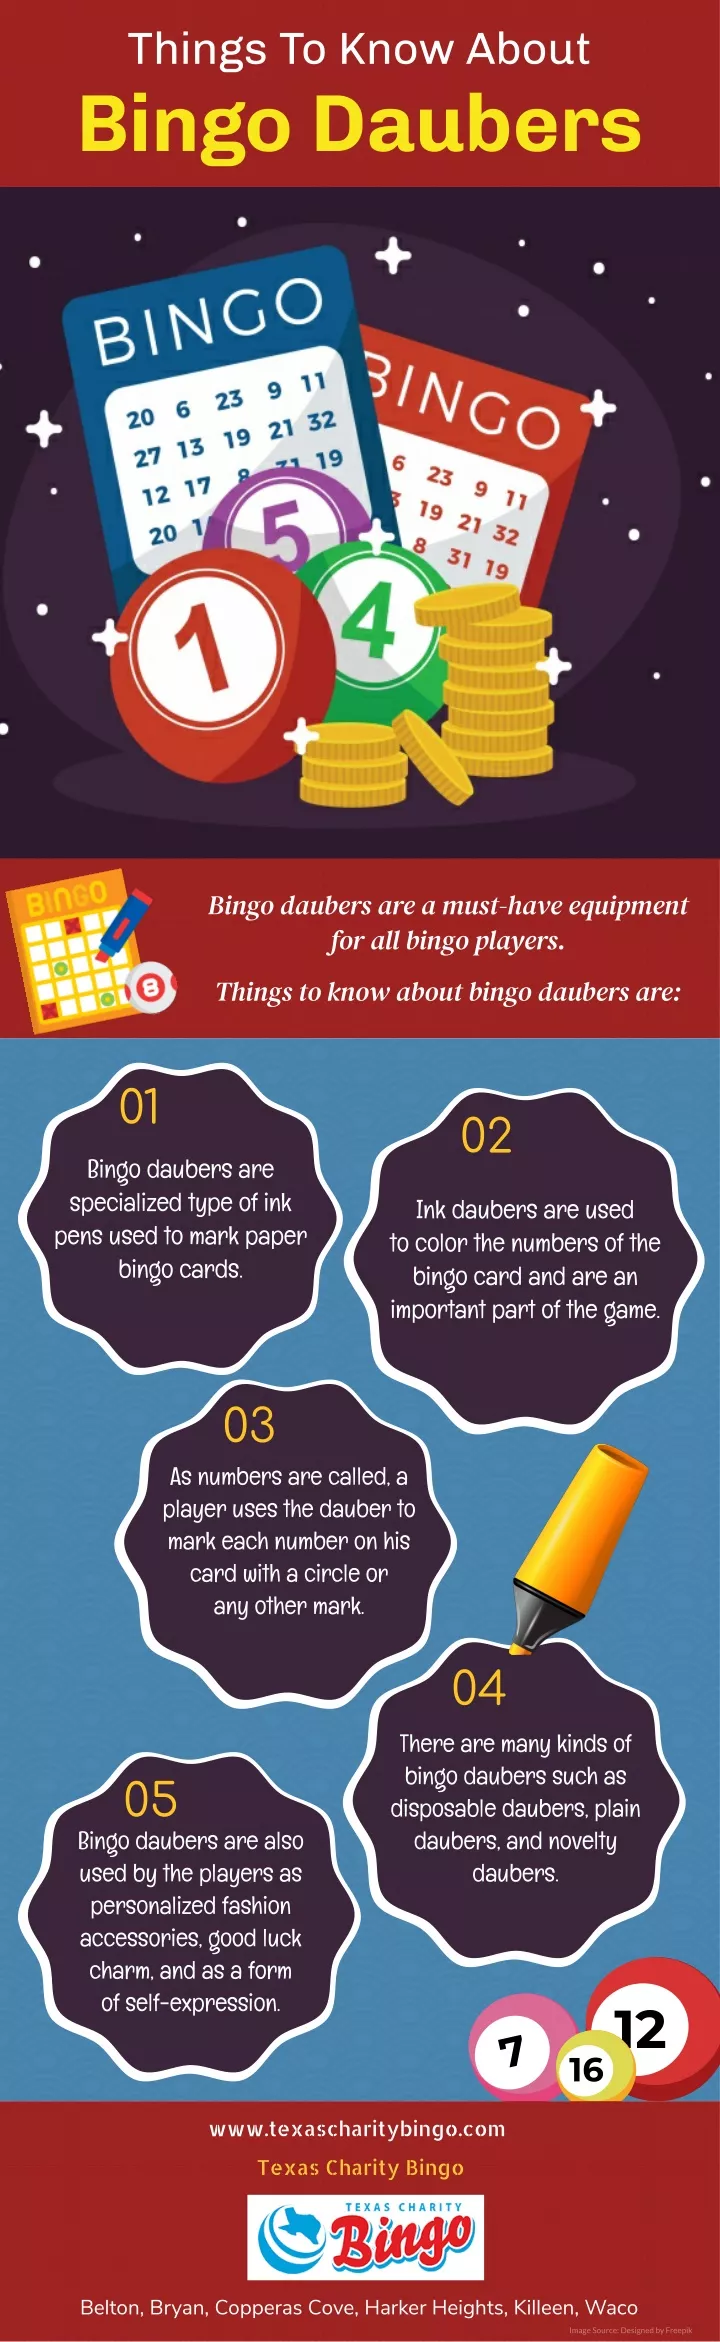 things to know about bingo daubers